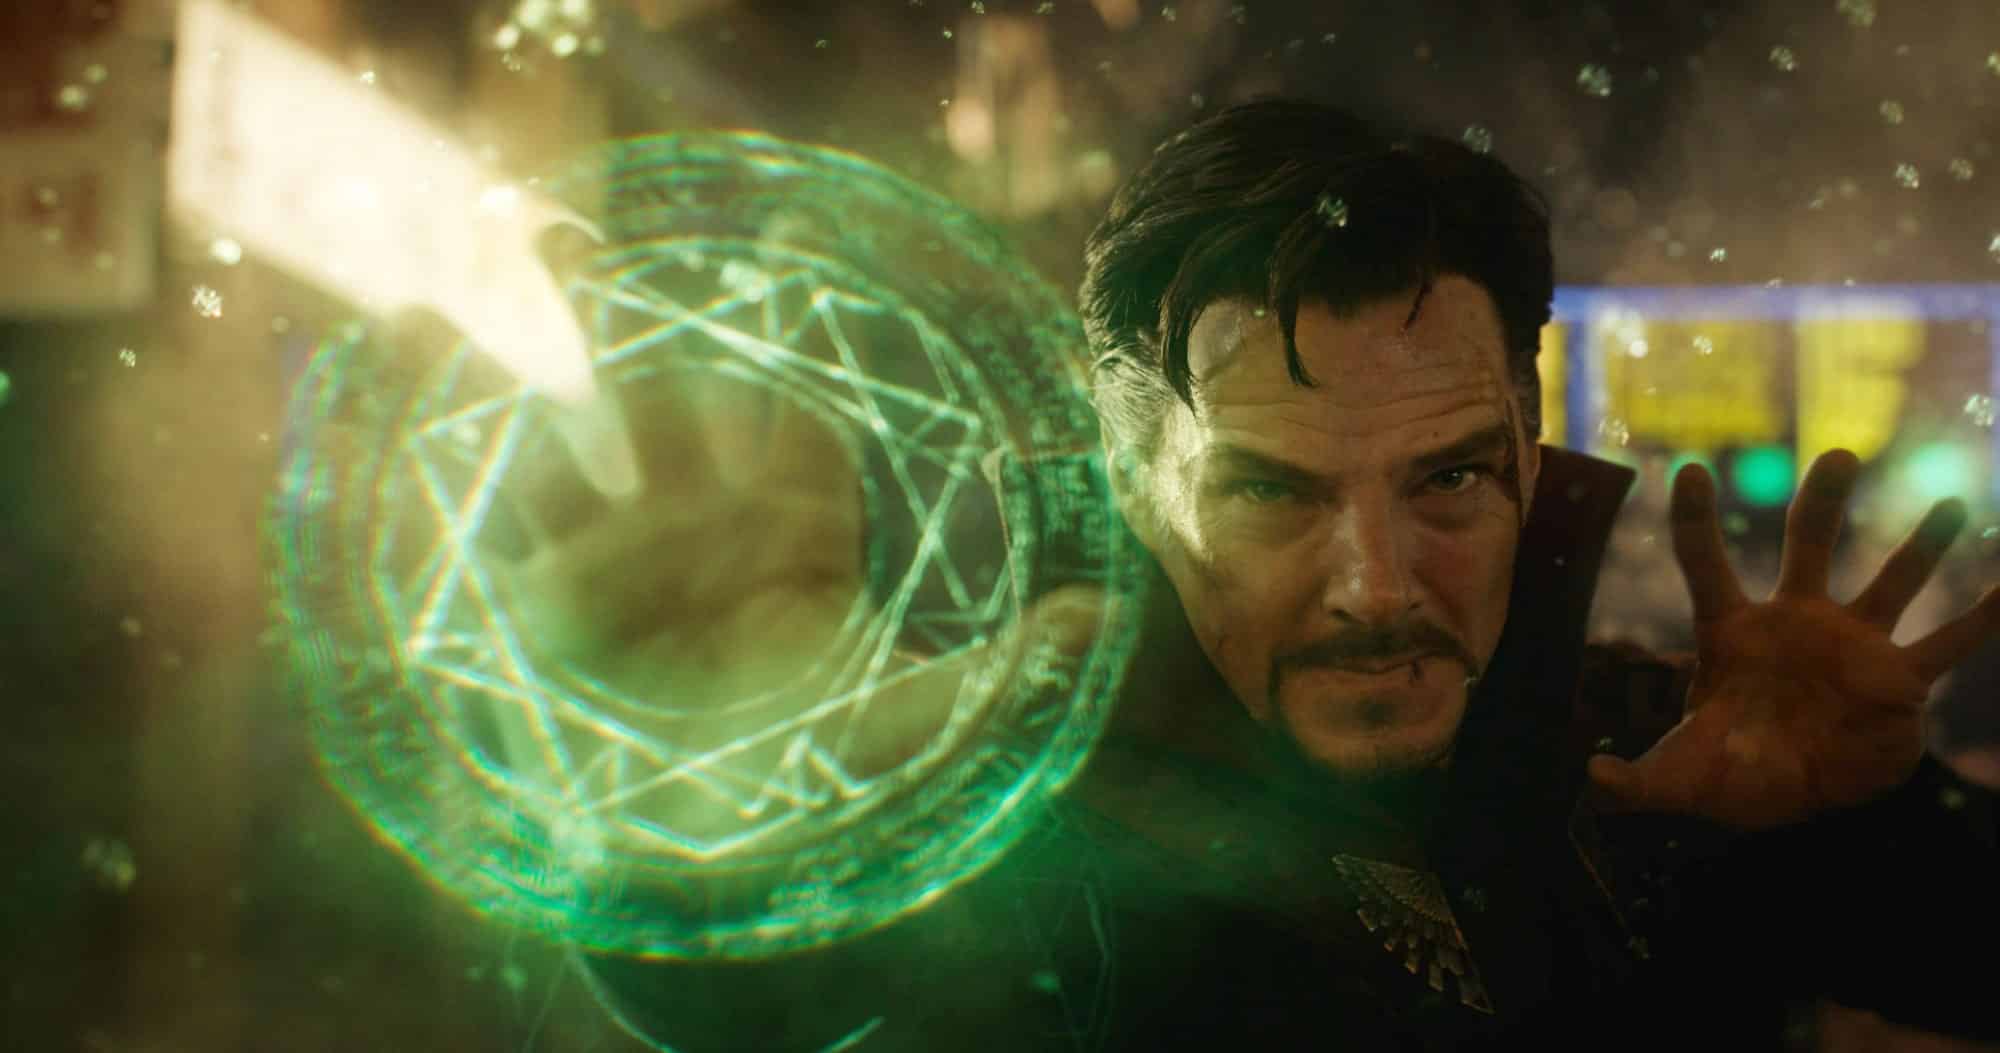 director Sami Raimi confirmed Doctor Strange in the Multiverse of Madness